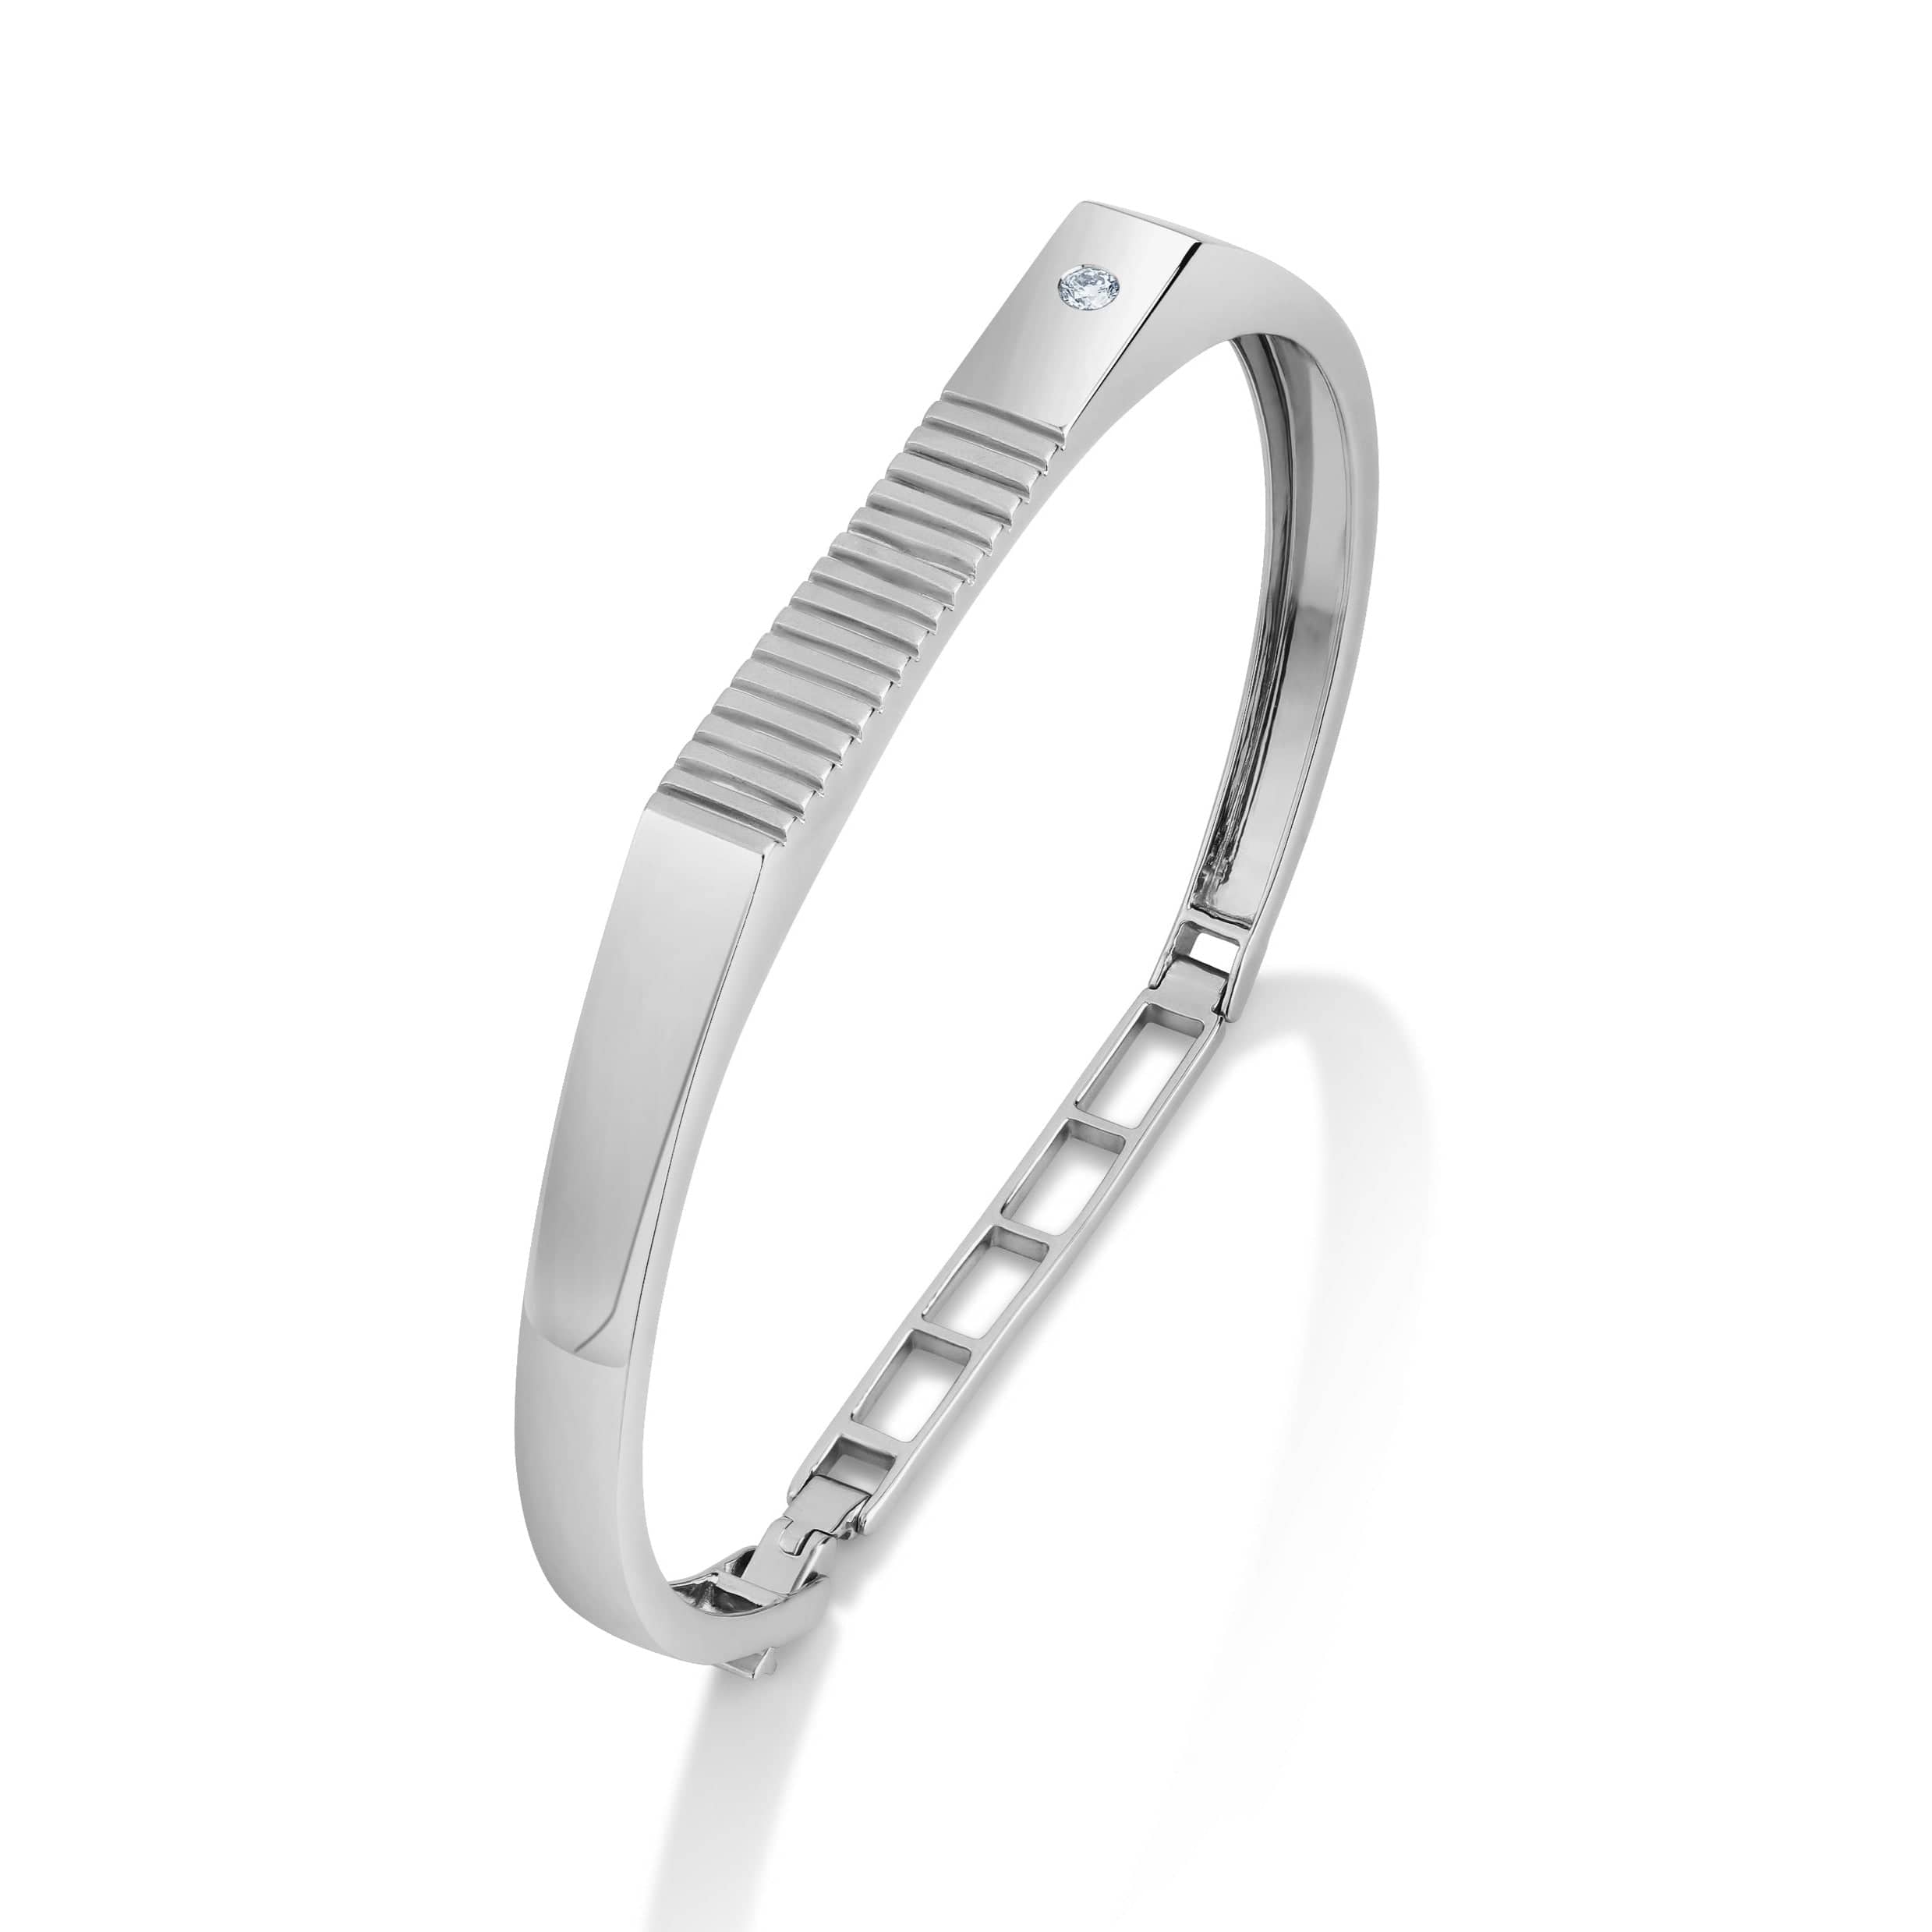 Buy DE FLOSSY SILVER 925 Sterling Stacking Silver Pavitra Kada For Men &  Boys | Stacking Silver Bangle for Him (2.10 Inches) at Amazon.in